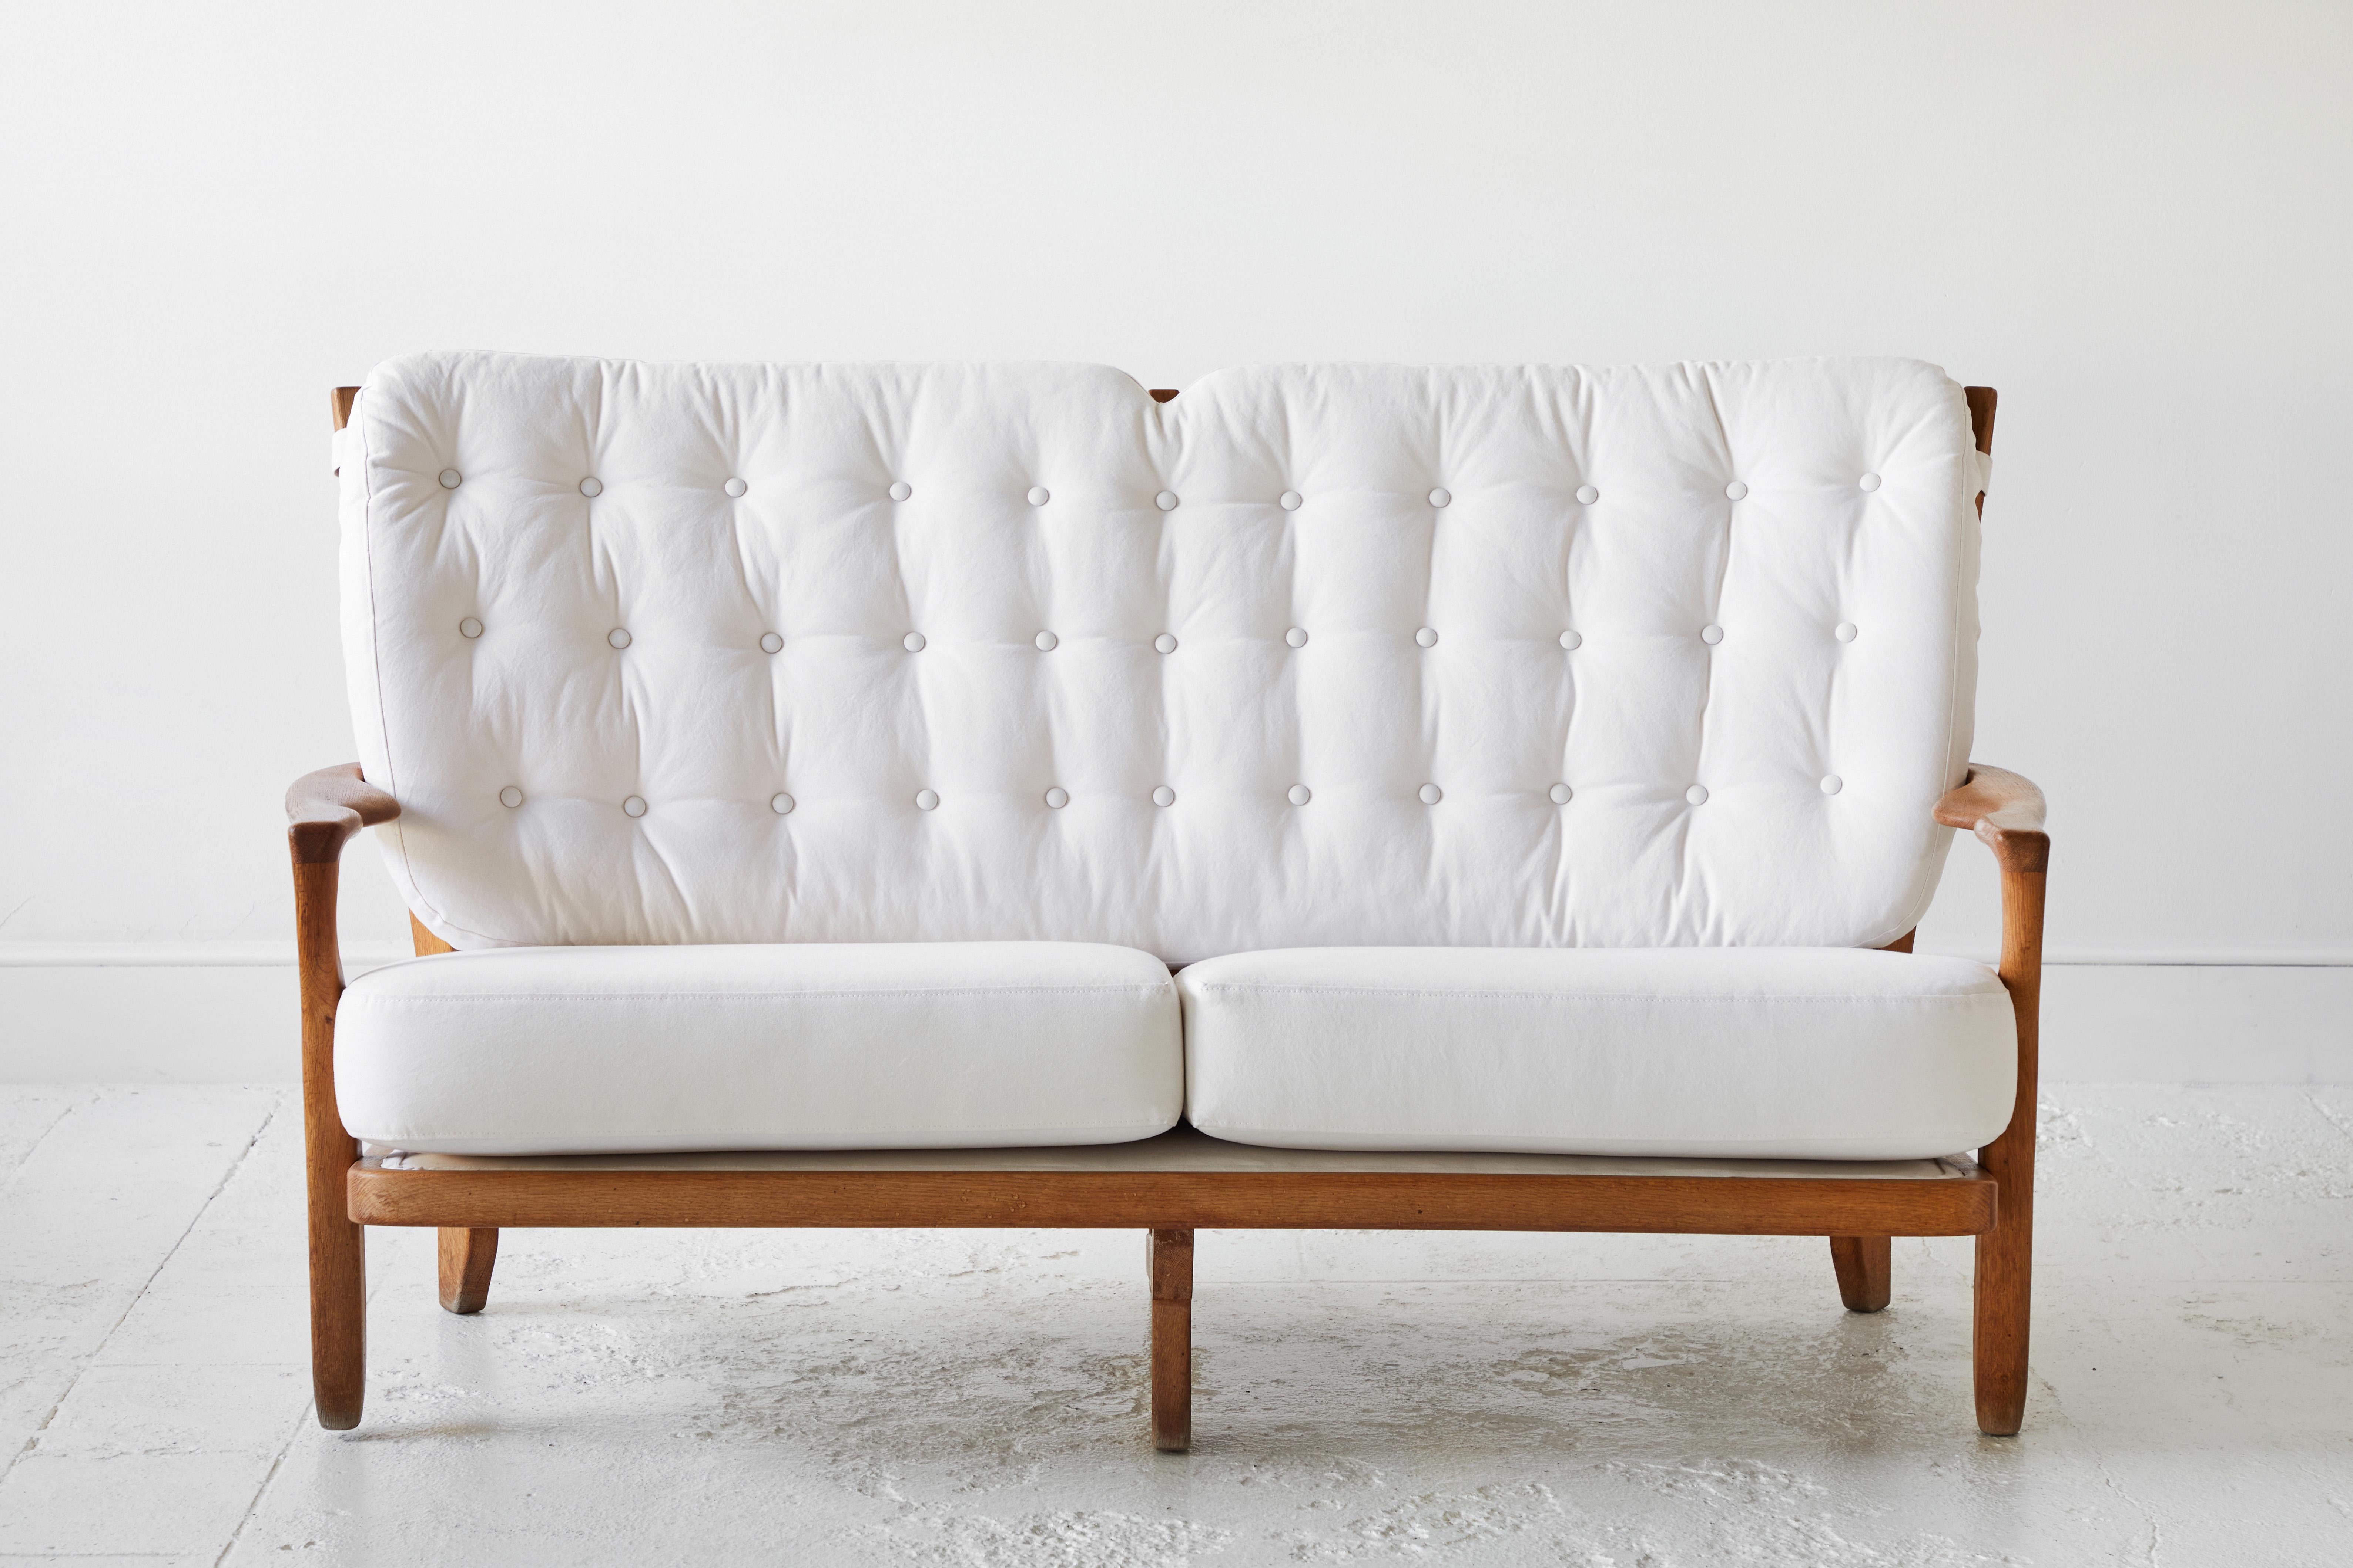 Guillerme and Chambron, upholstered in a white stonewash cotton, oak, France, 1950s

This sculptural carved oak settee is designed by Guillerme and Chambron. The design duo is known for their sculptural, crafted solid oak furniture. This